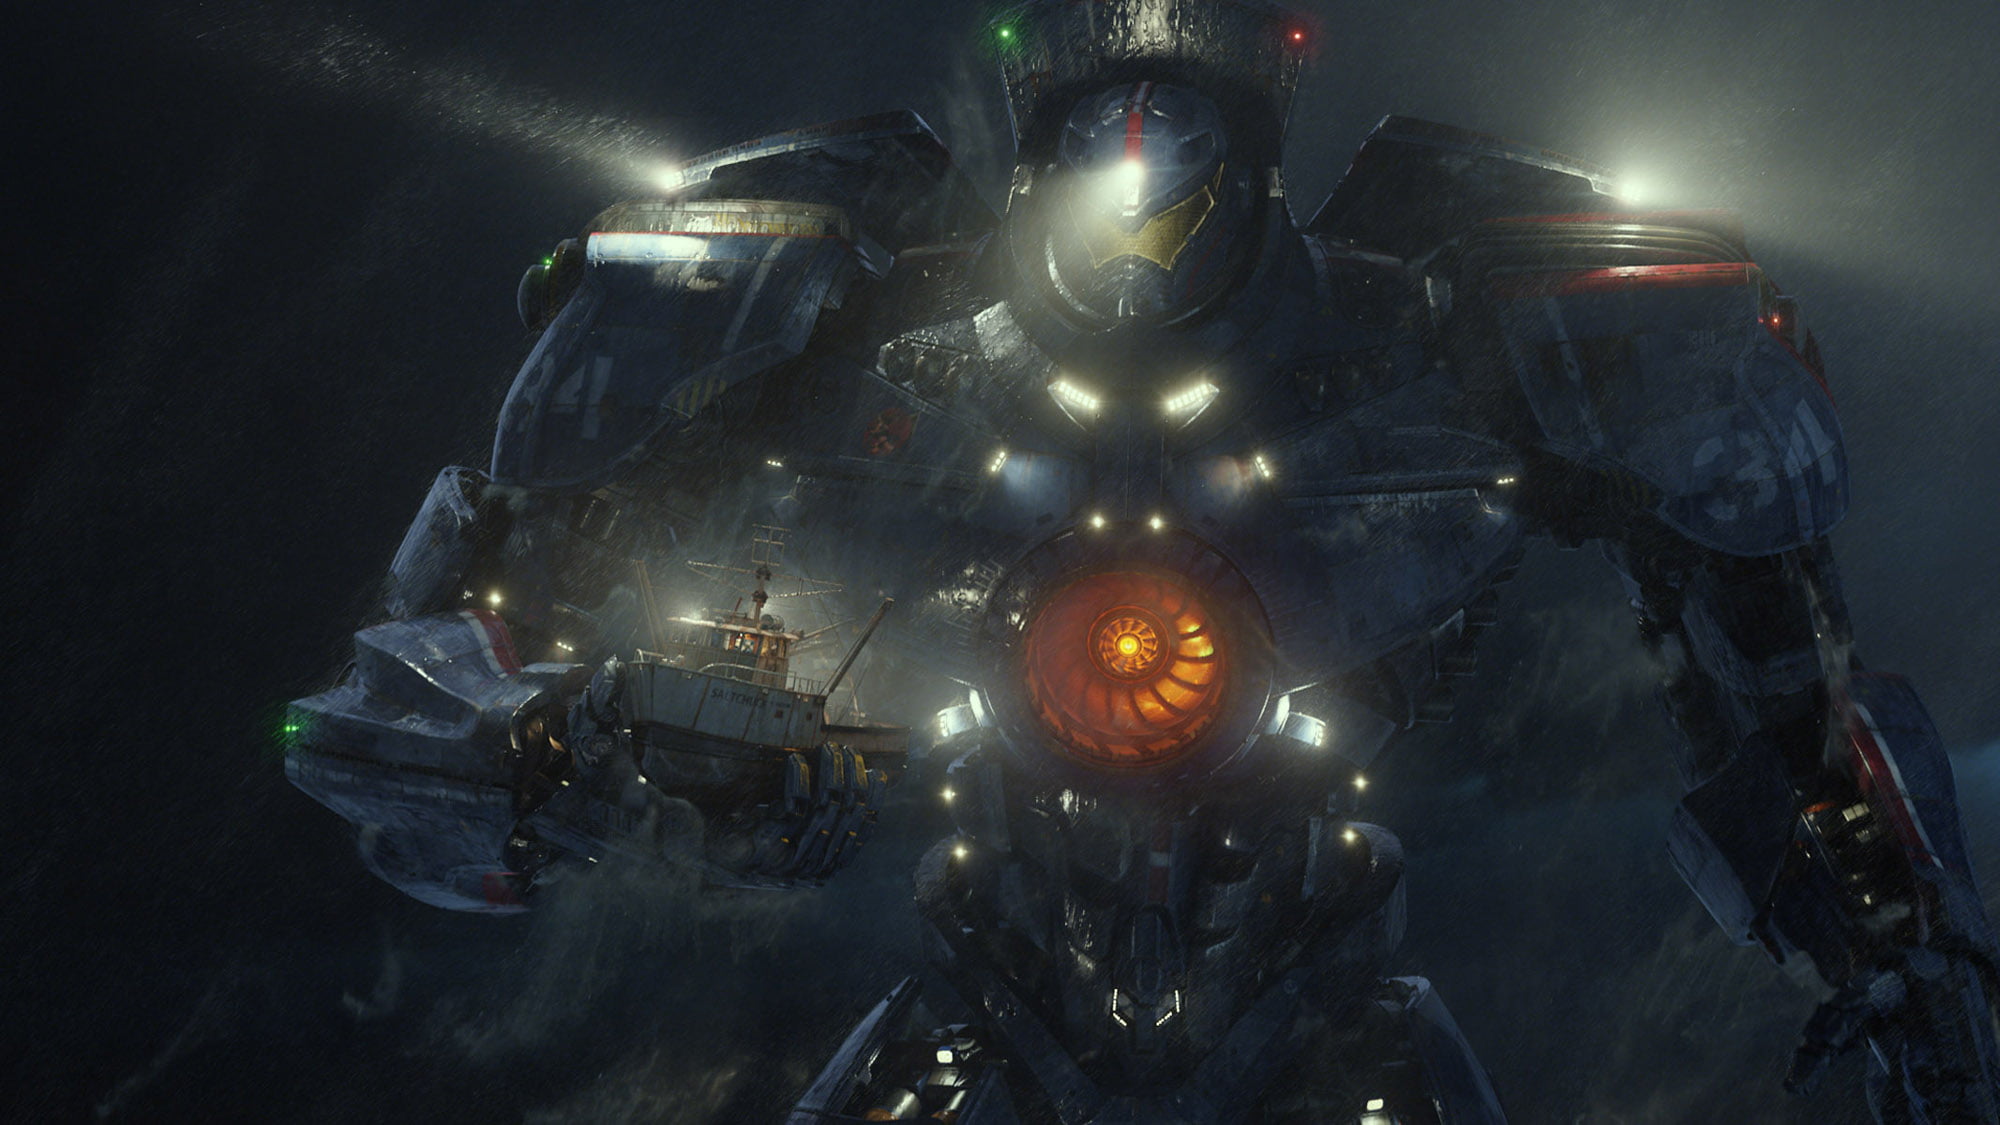 Gipsy Danger from Pacific Rim, movies, technology, transportation